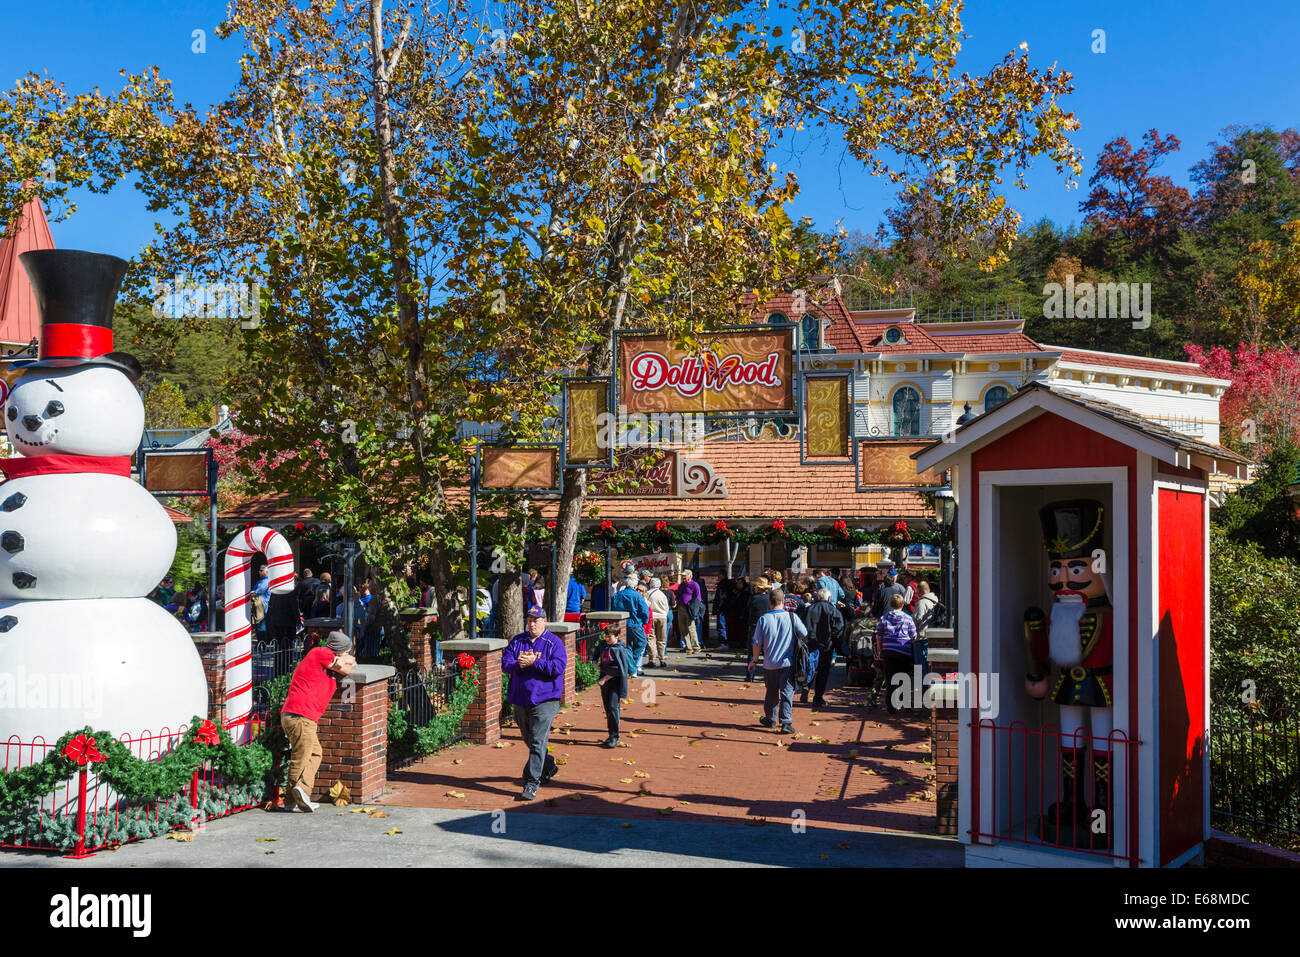 Dollywood Tennessee Stock Photos & Dollywood Tennessee Stock Images - Alamy1300 x 957